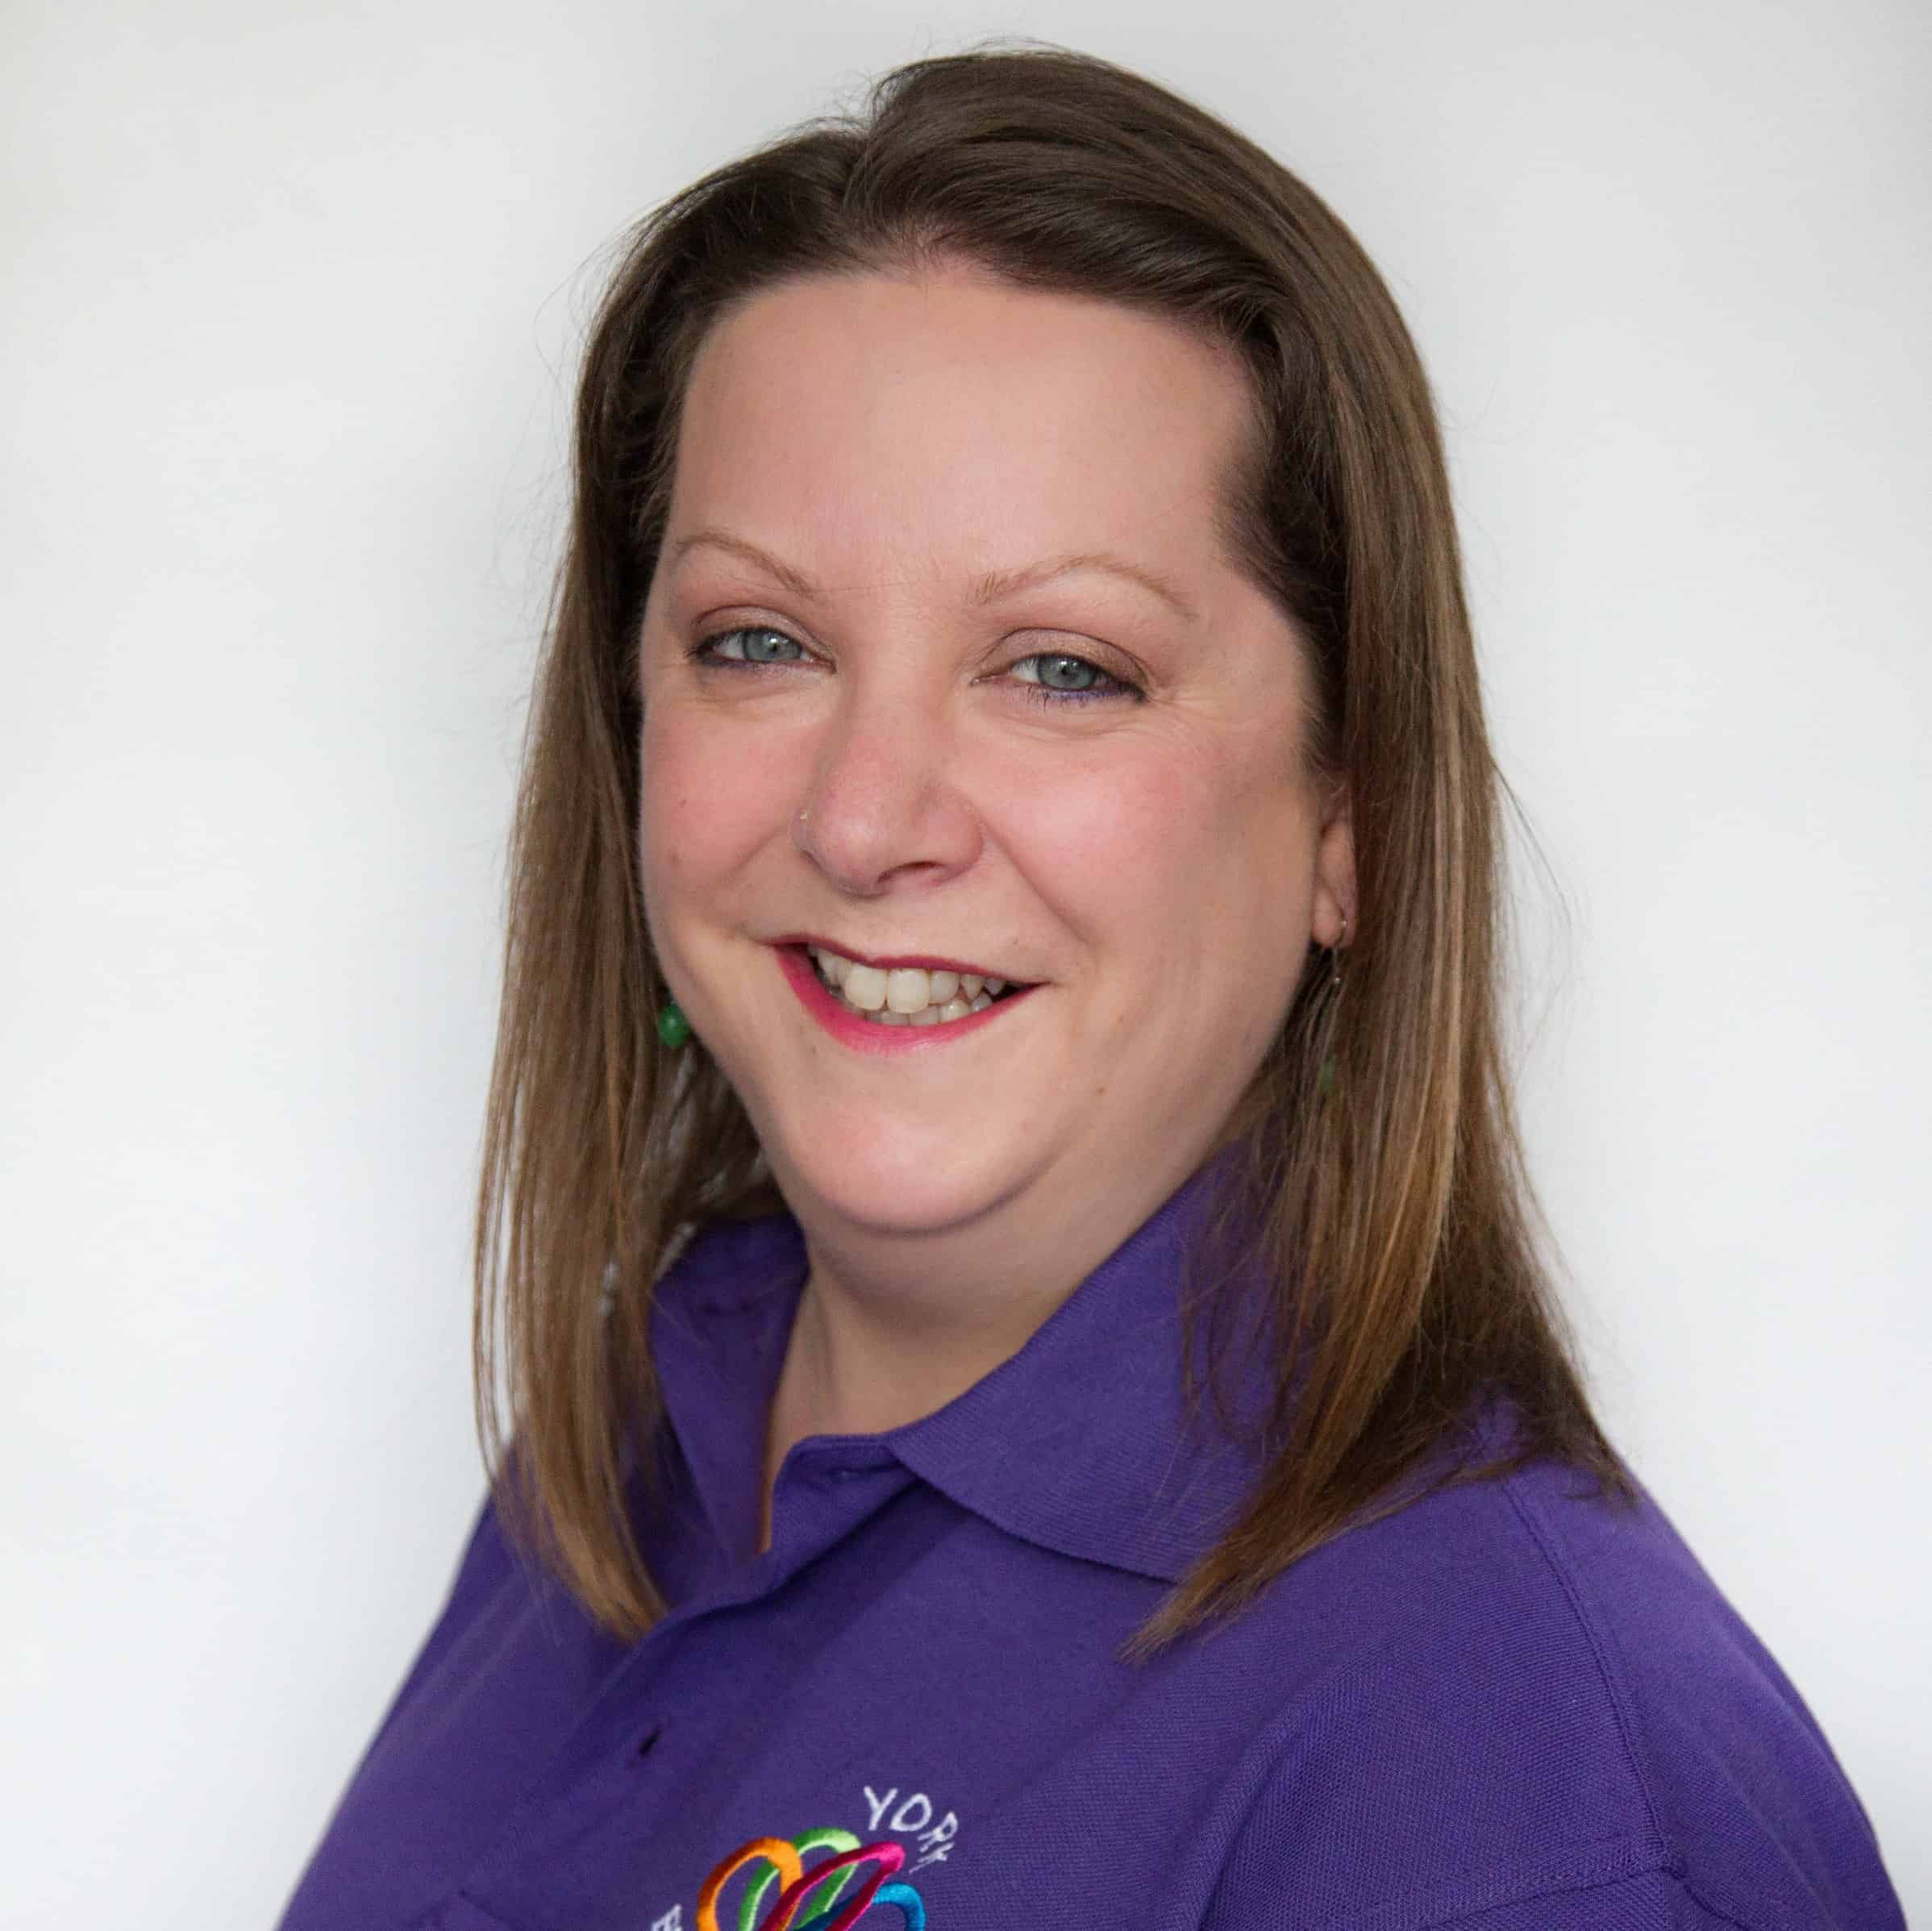 A headshot of Zoe, a woman who has survived cancer twice, smiles to the camera. She has shoulder-length brown hair and is wearing a purple 'York Breast Friends' polo shirt.